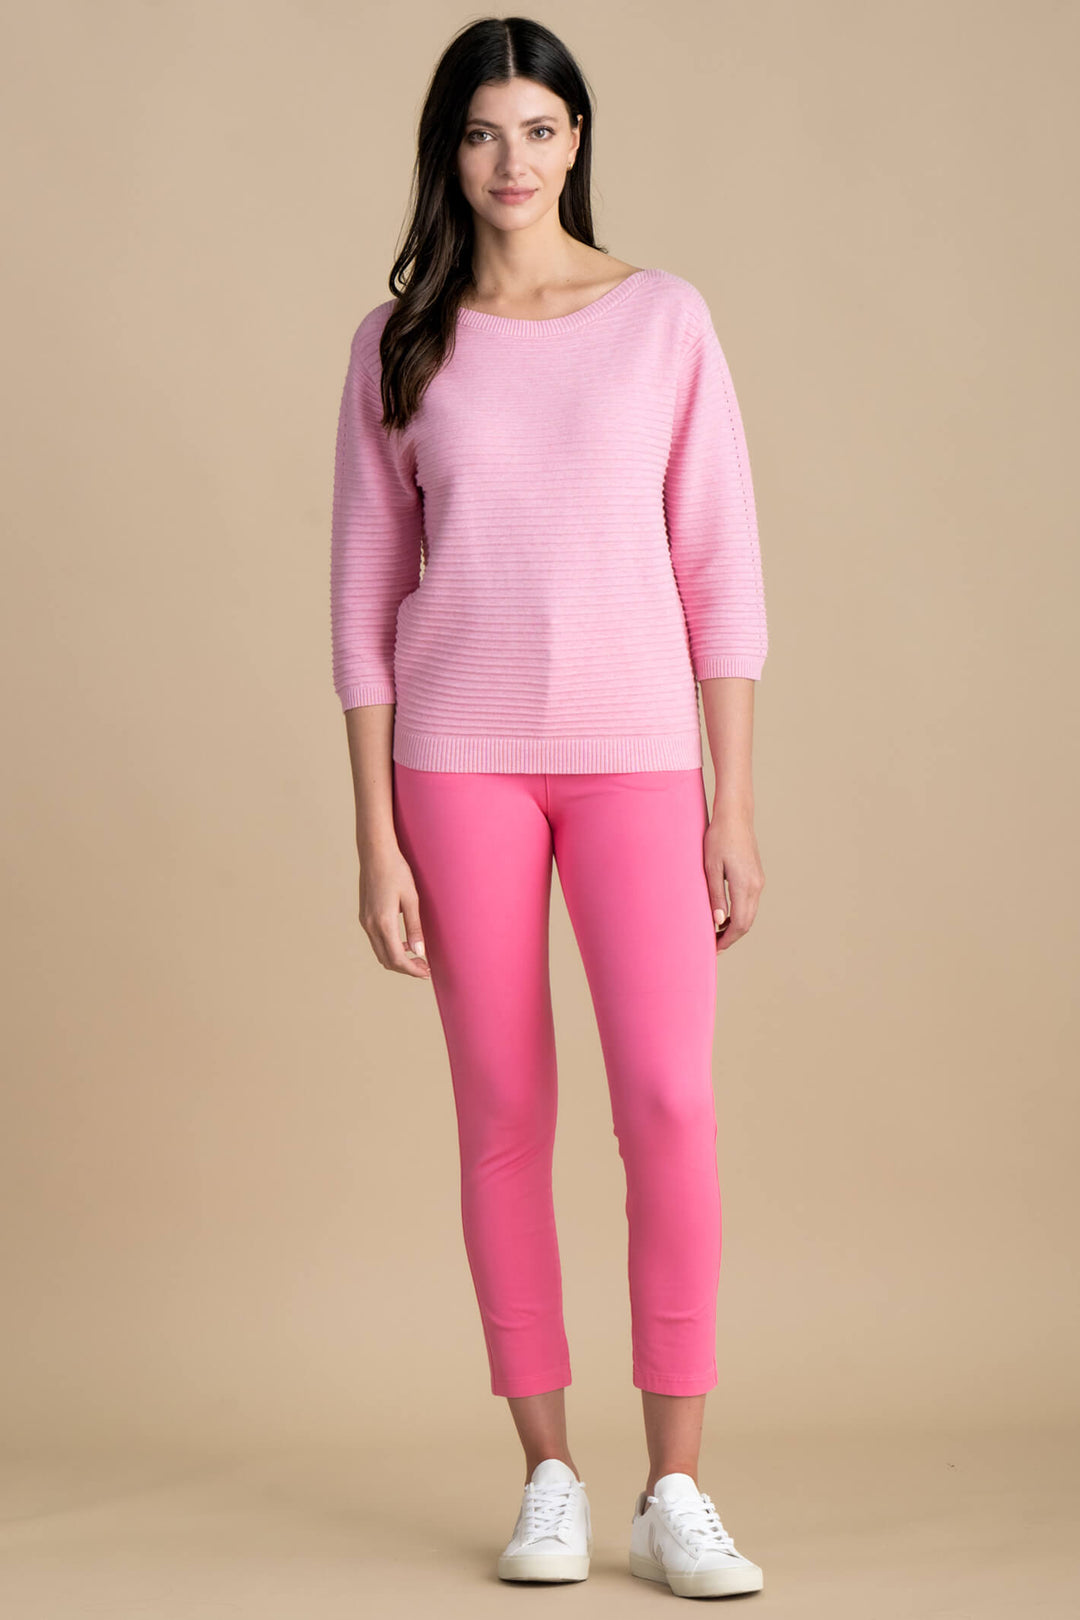 Marble Fashions 7009 194 Pink Wide Neck Ribbed Jumper - Experience Boutique